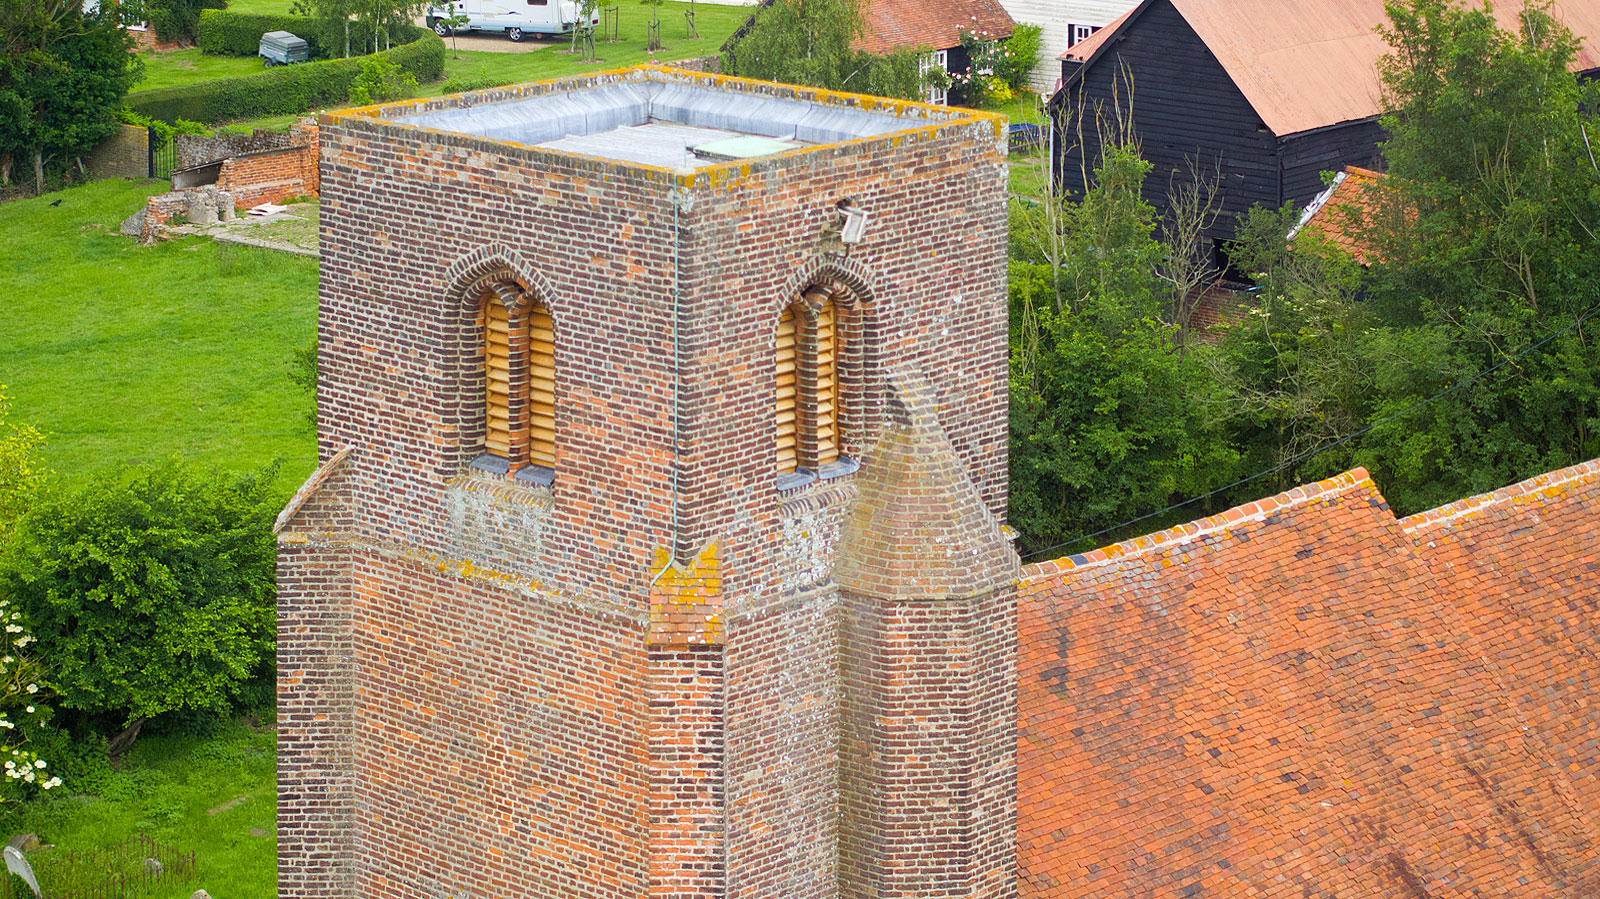 Aerial photograph of an historic church in Essex showing a close up view of the tower